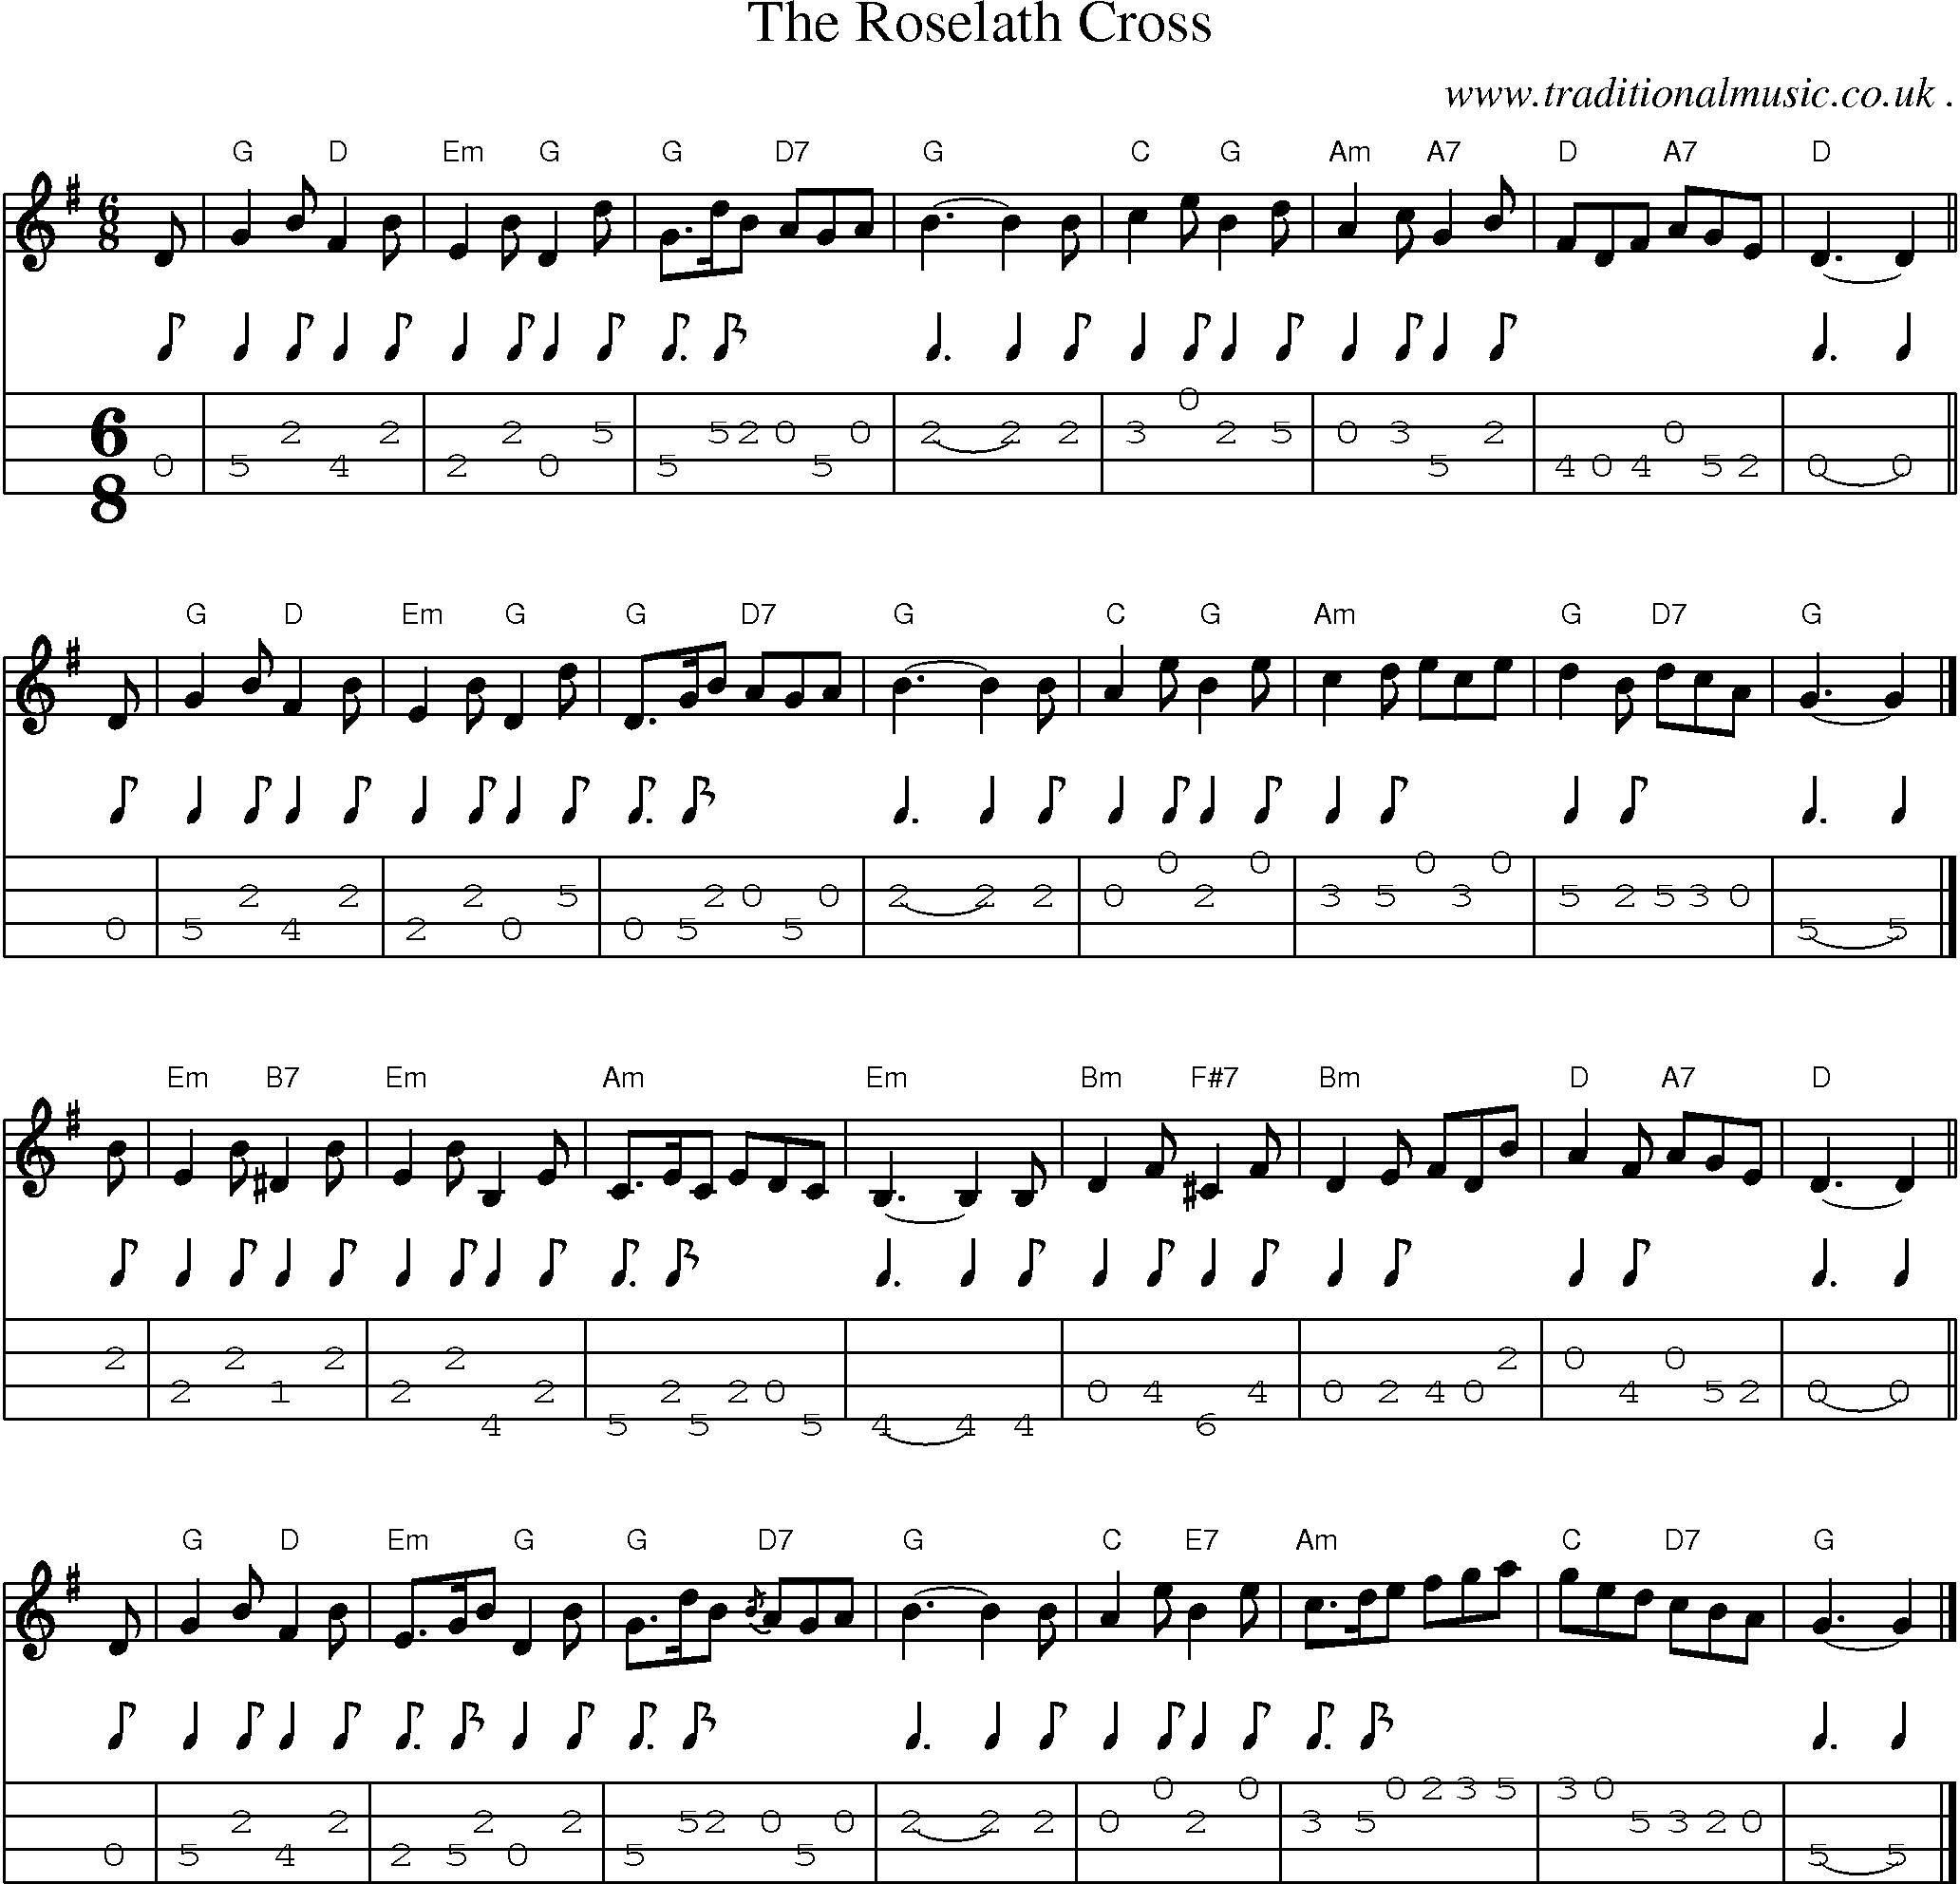 Sheet-music  score, Chords and Mandolin Tabs for The Roselath Cross